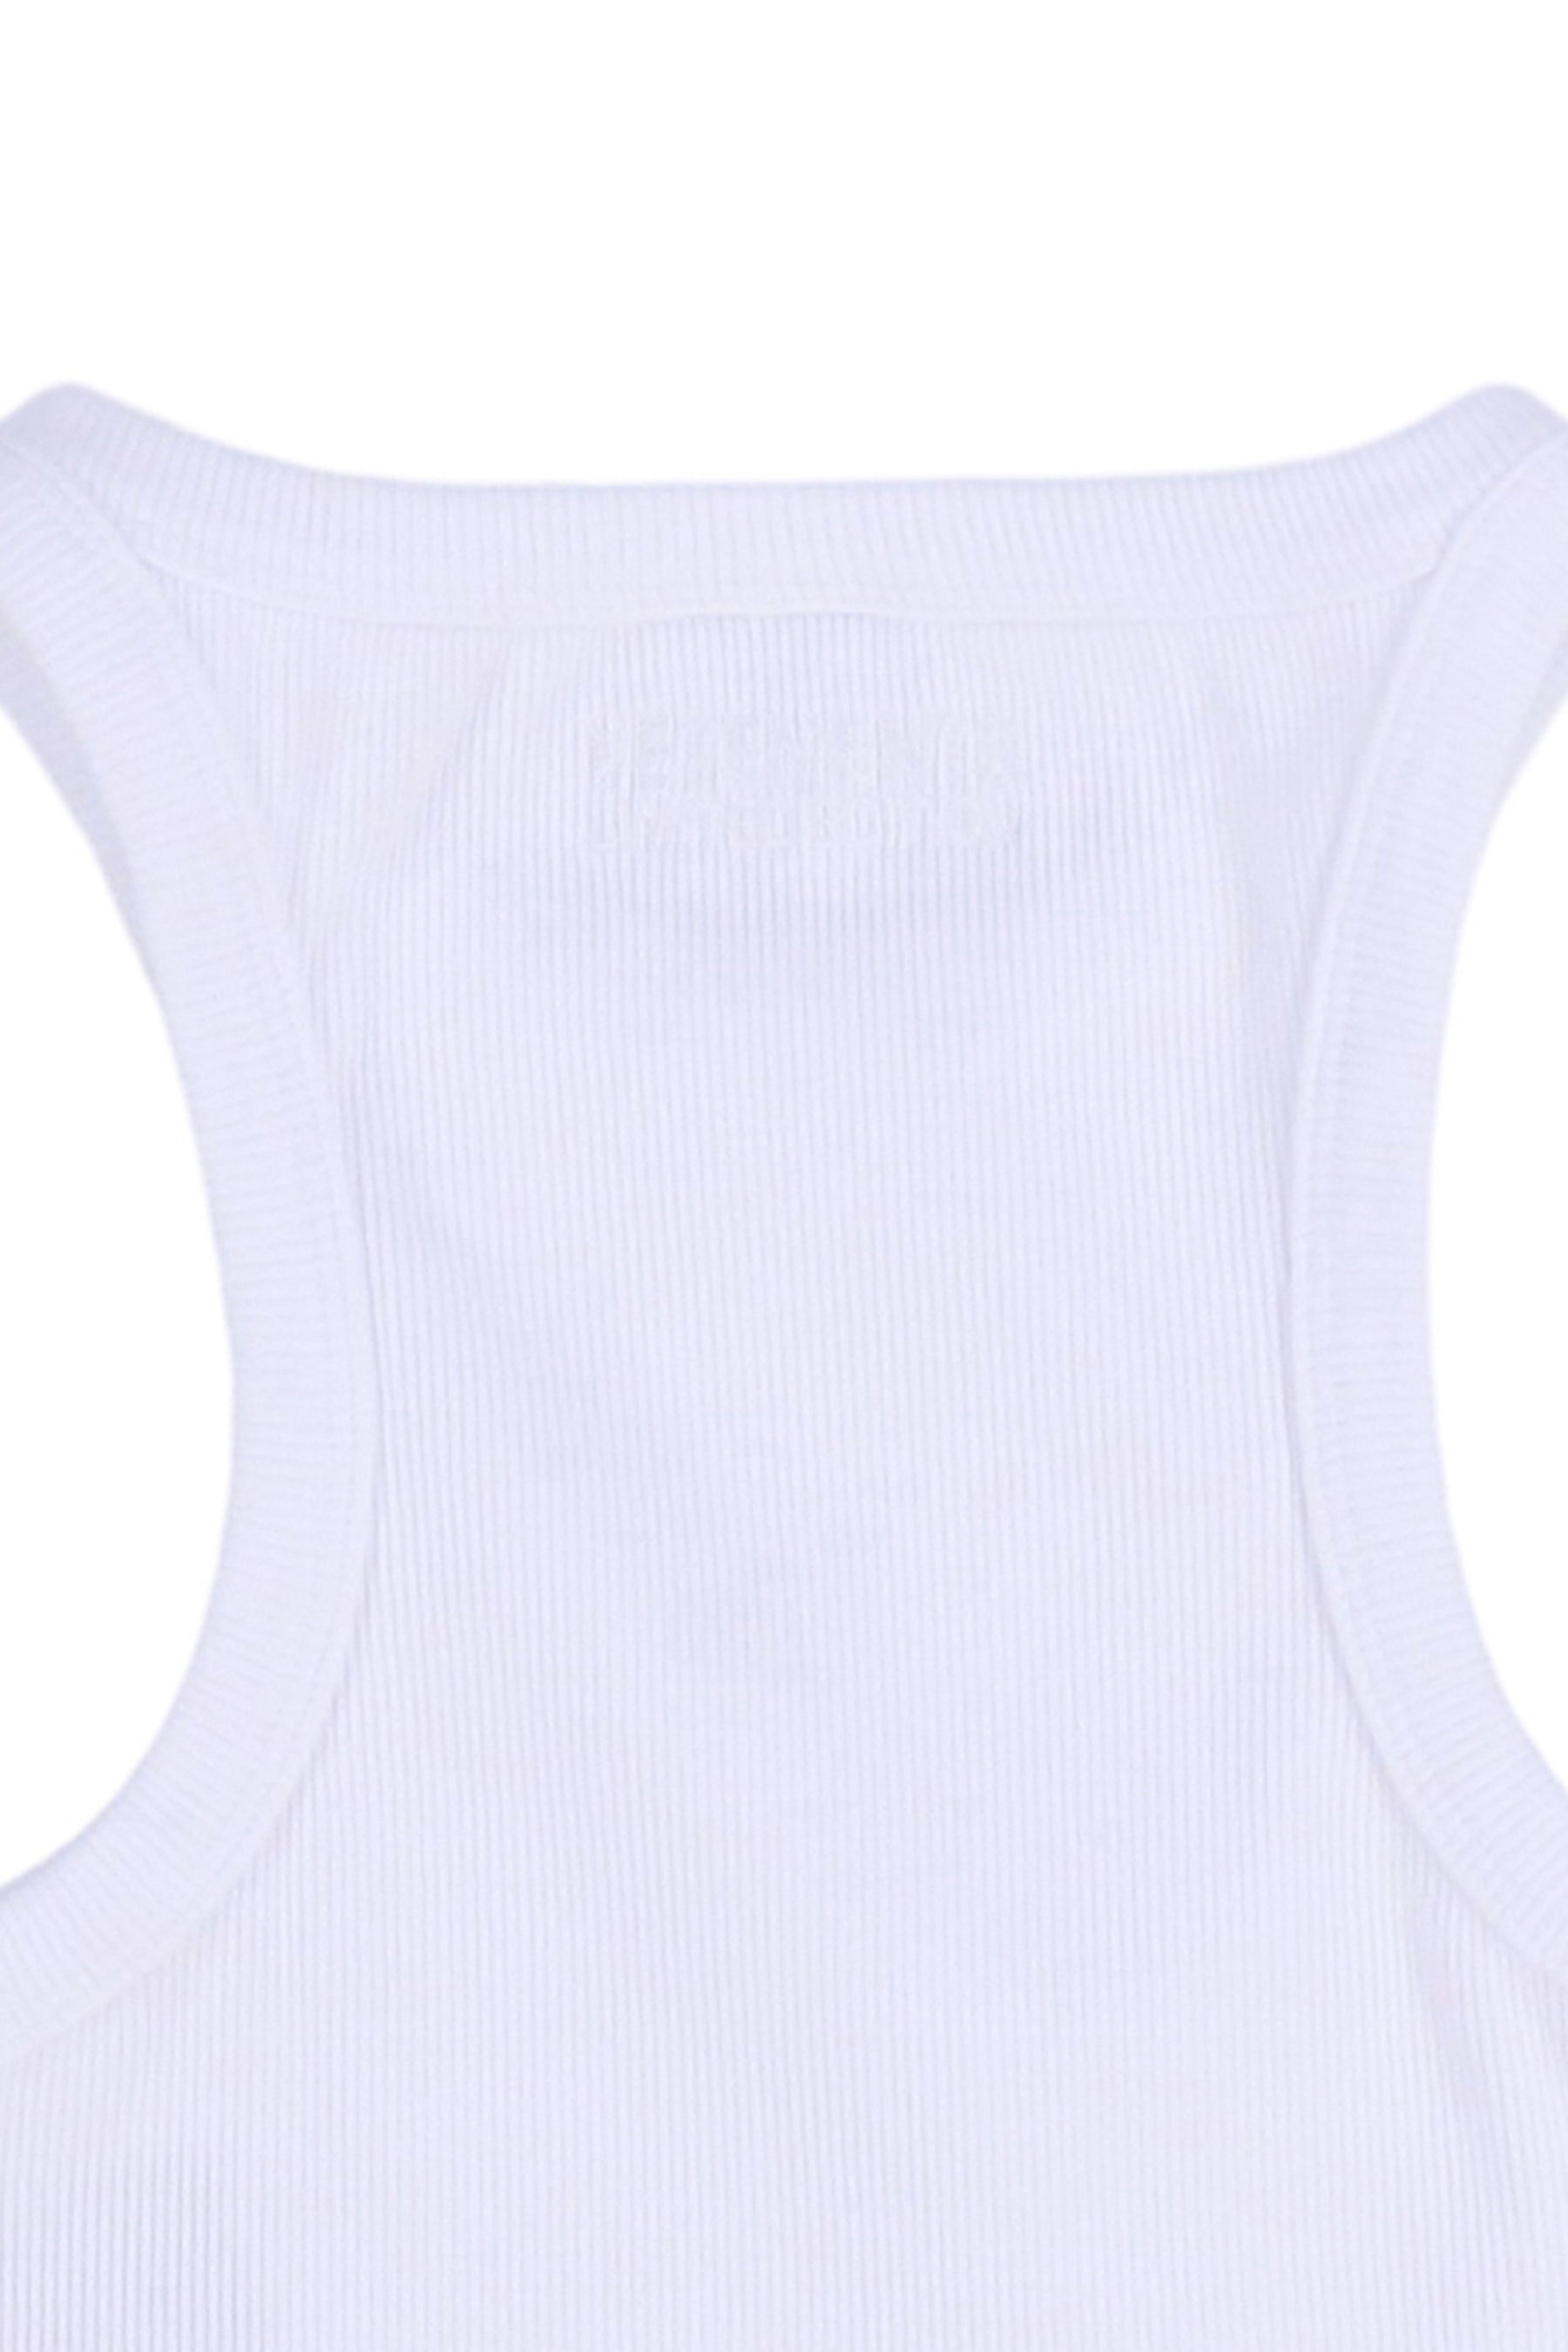 CROPPED RACING TANK TOP / WHT